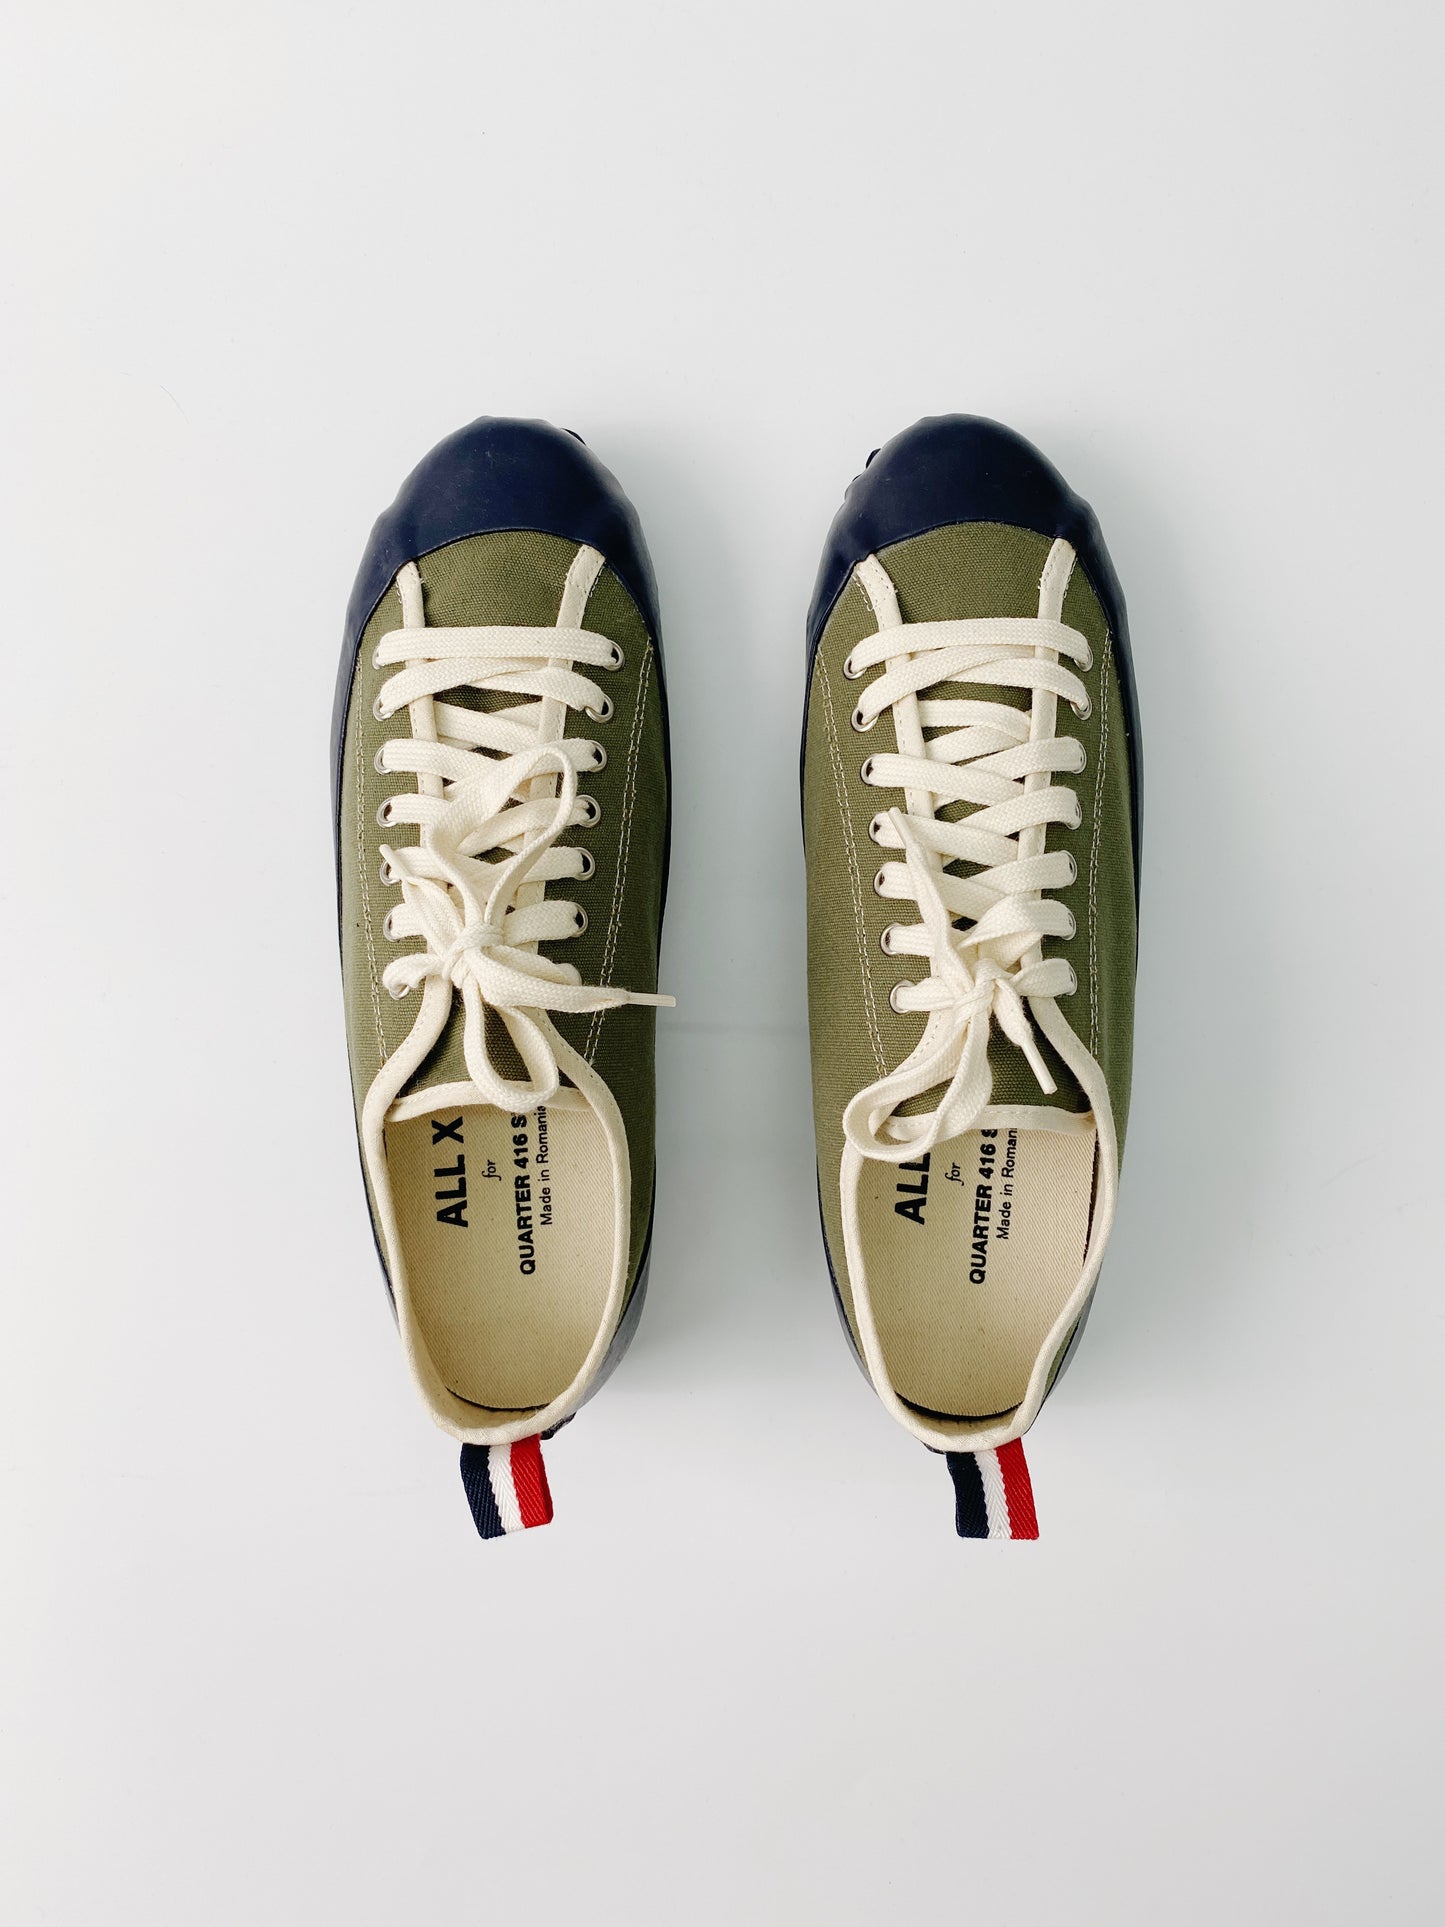 ALLX Marine Low Shoes (Olive/ Navy)